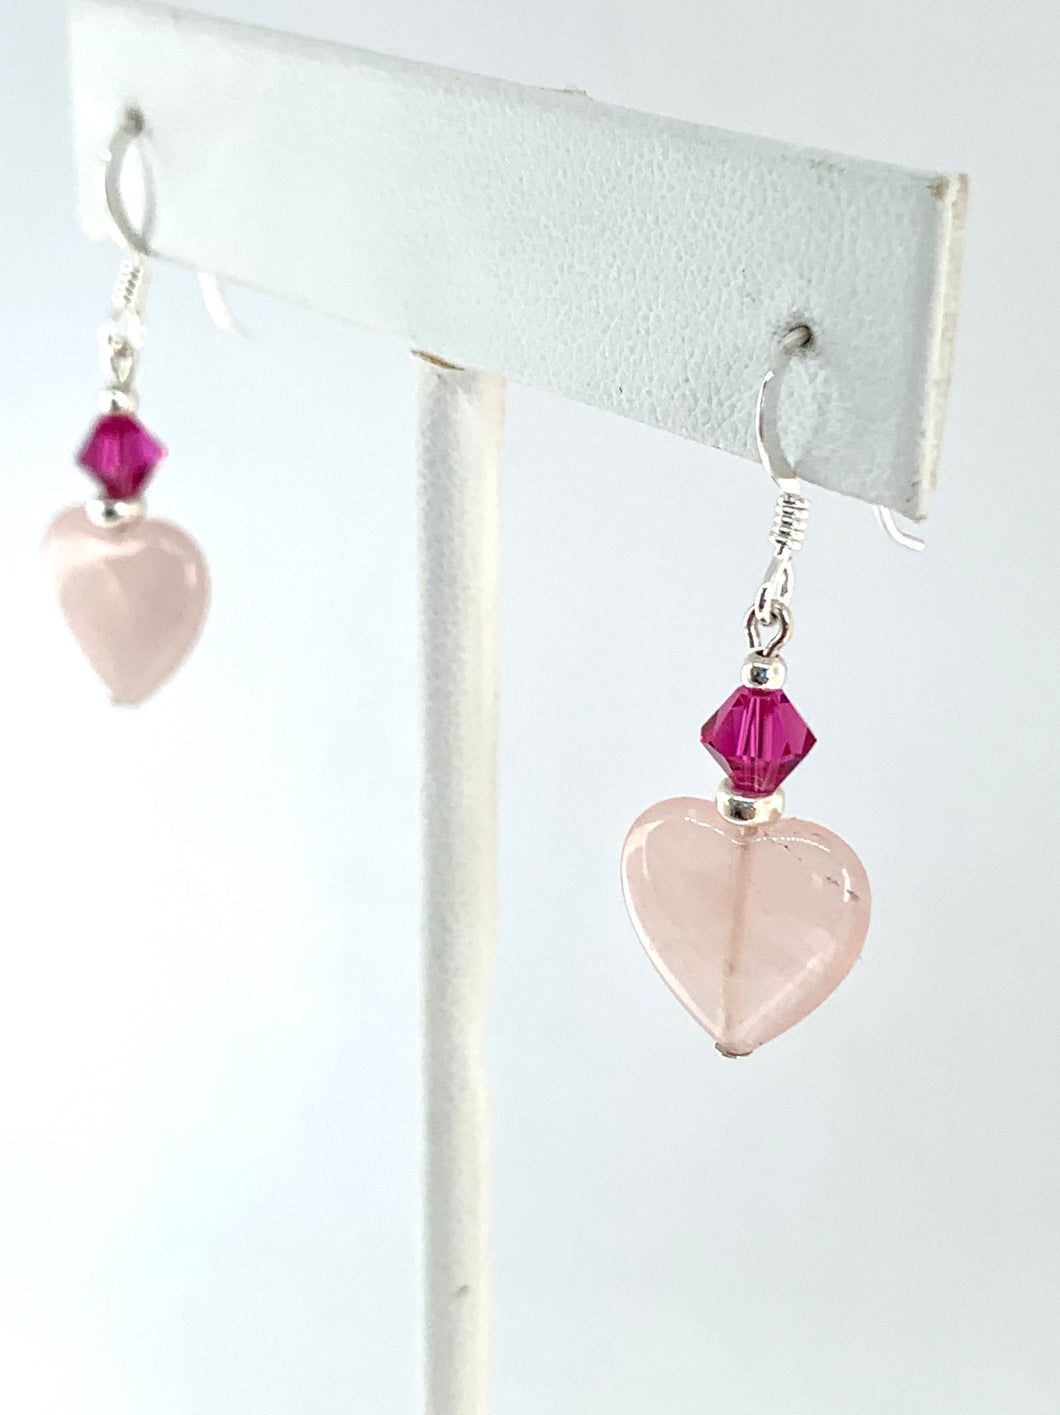 Rose Quartz and Swarovski Crystal Heart Earrings - Lively Accents